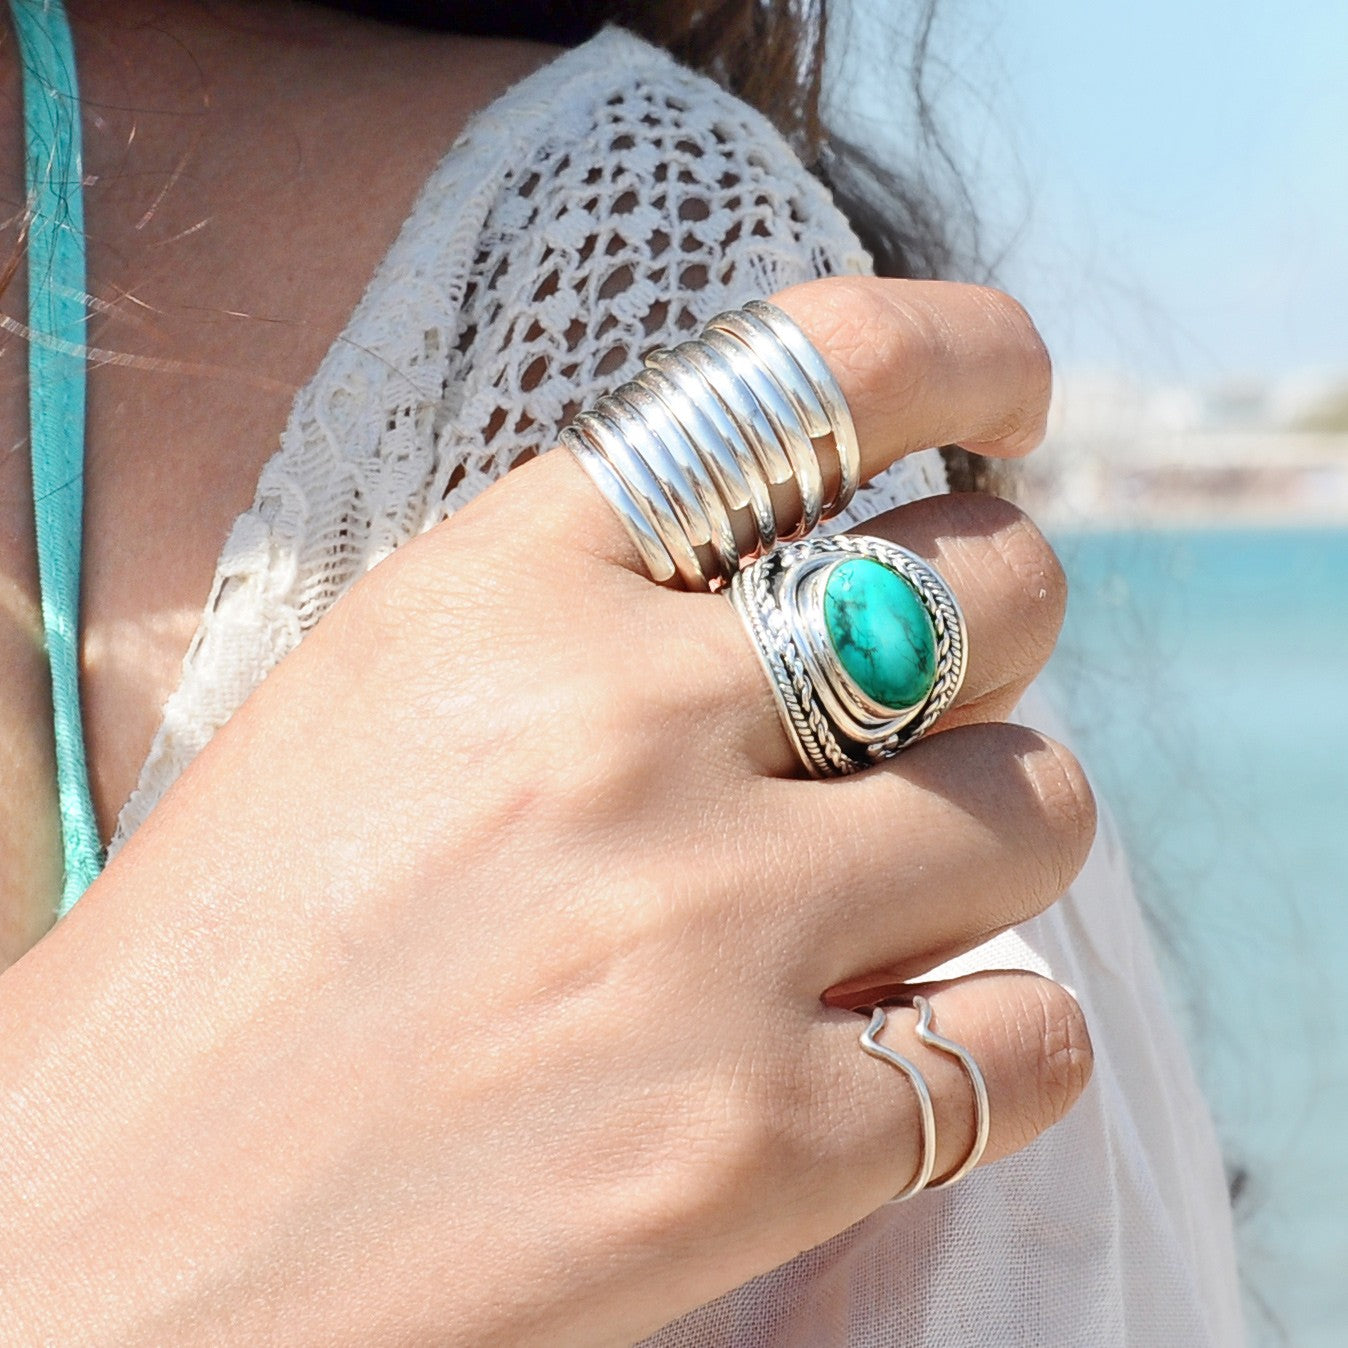 Sterling Silver and Turquoise Ring